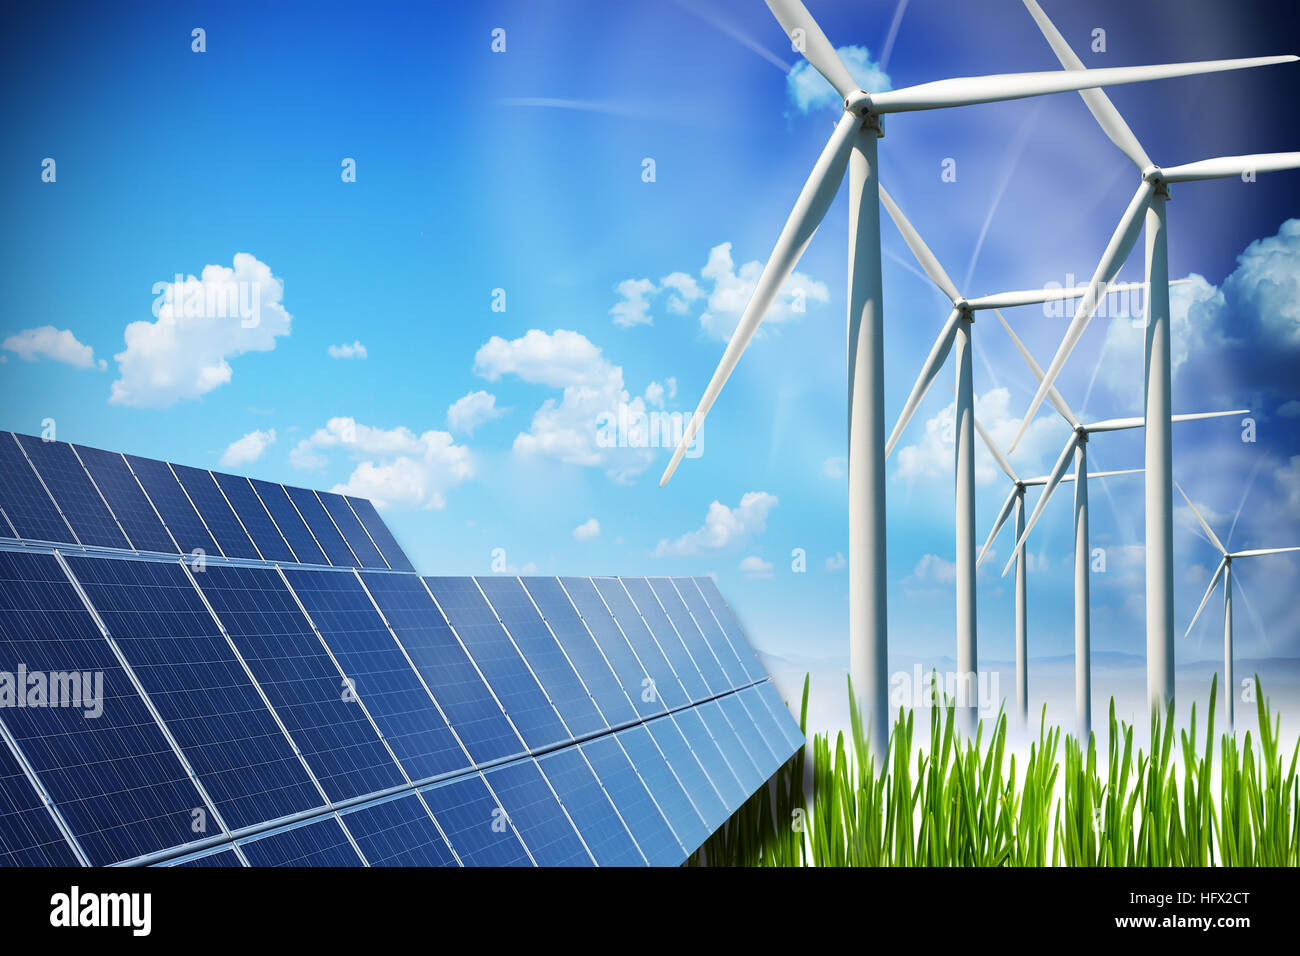 Renewable energy concept with solar panels and wind turbines on green field Stock Photo